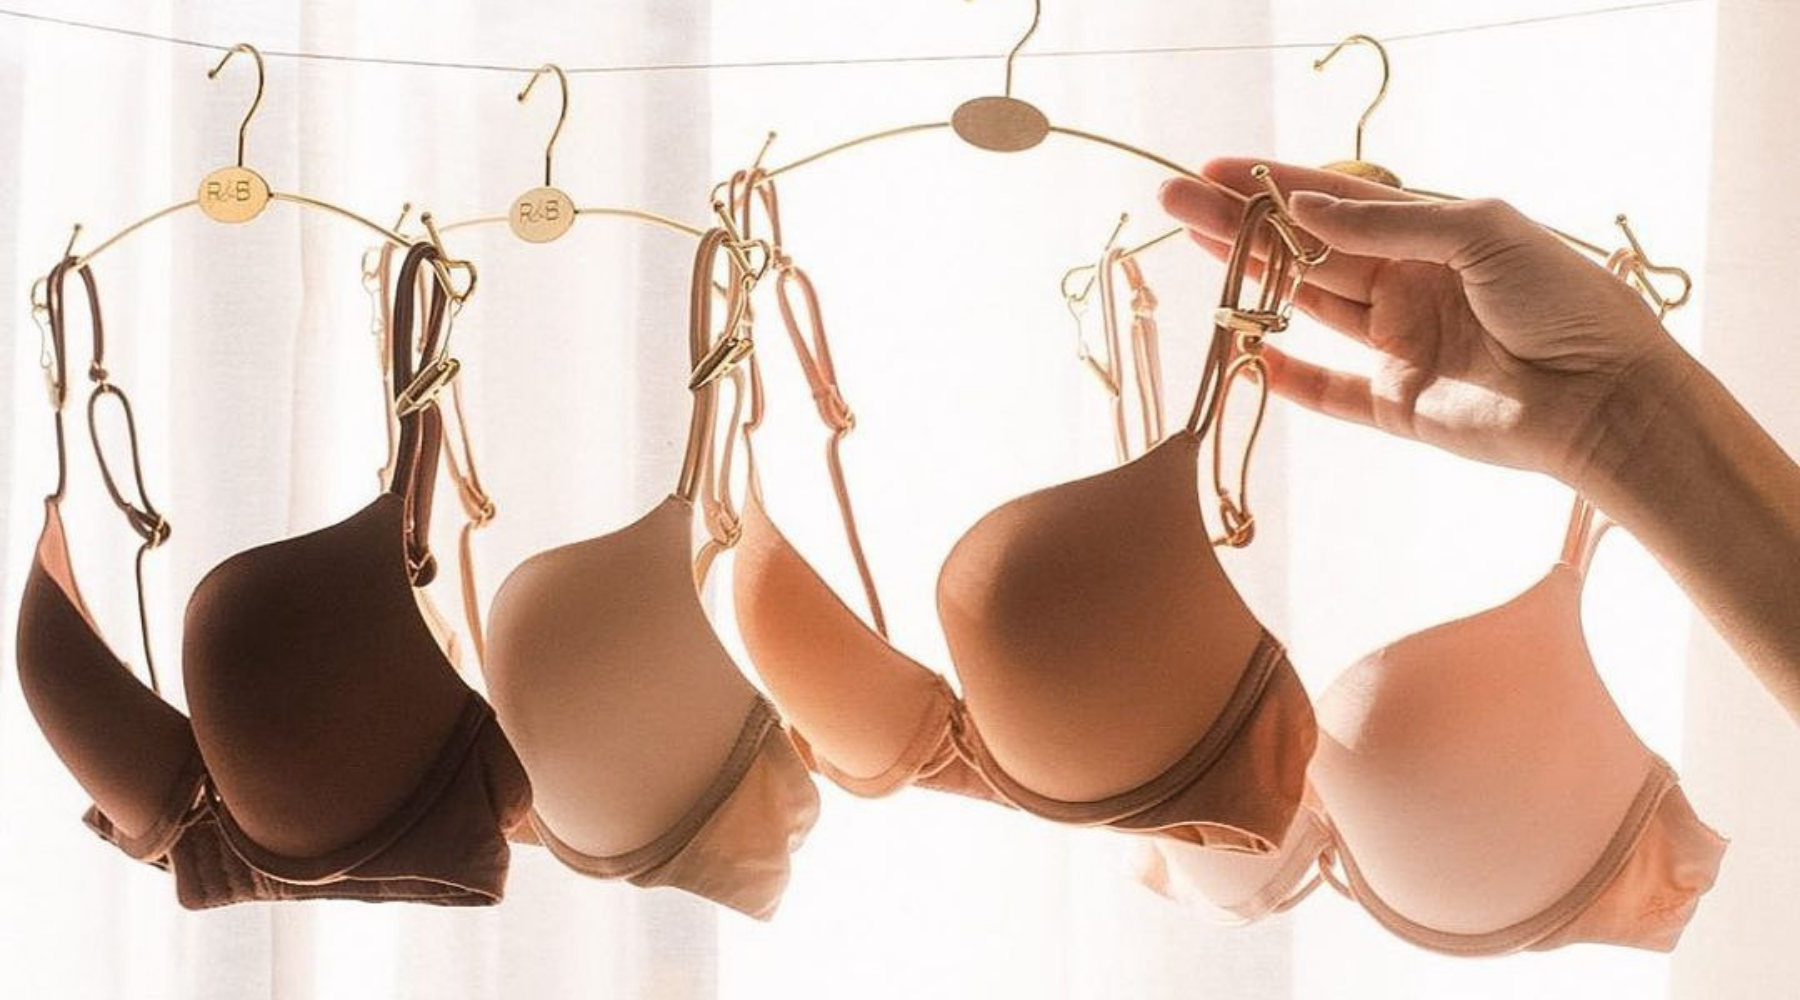 How to Check You Have the Right Bra Size and Why It’s Important